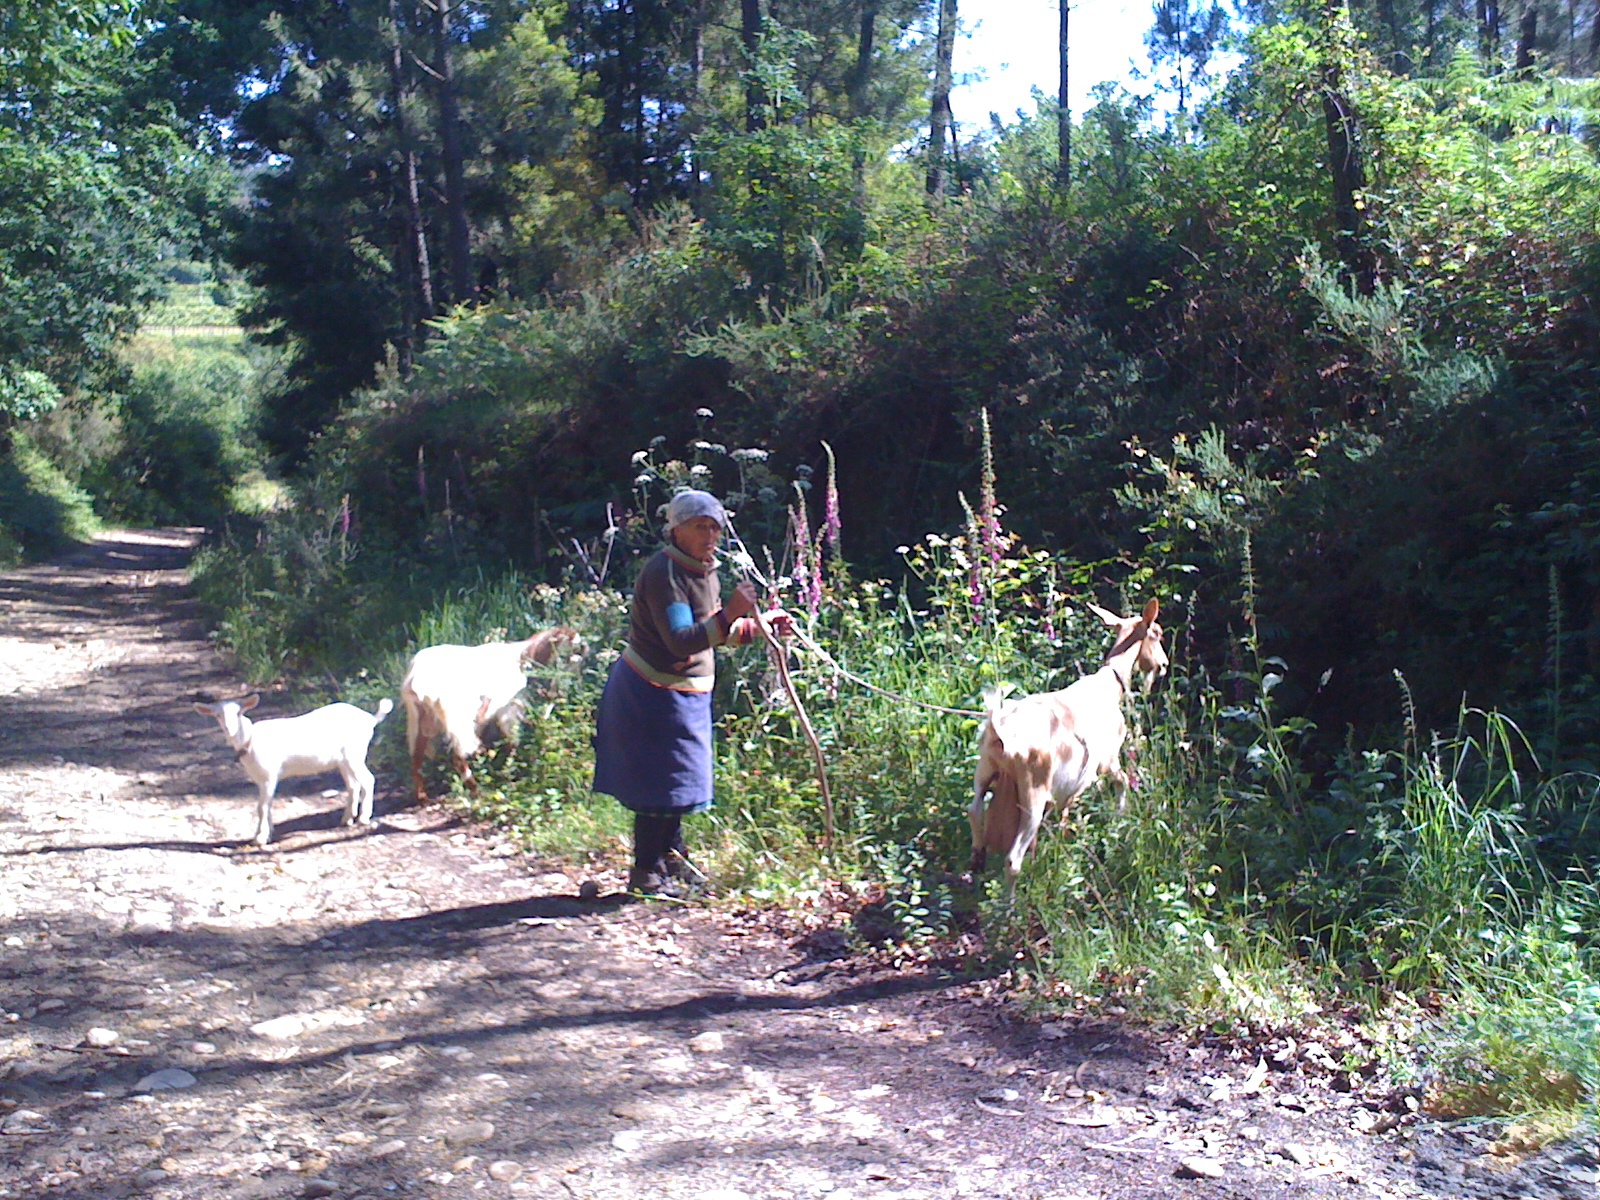 The little old Lady and the three goats